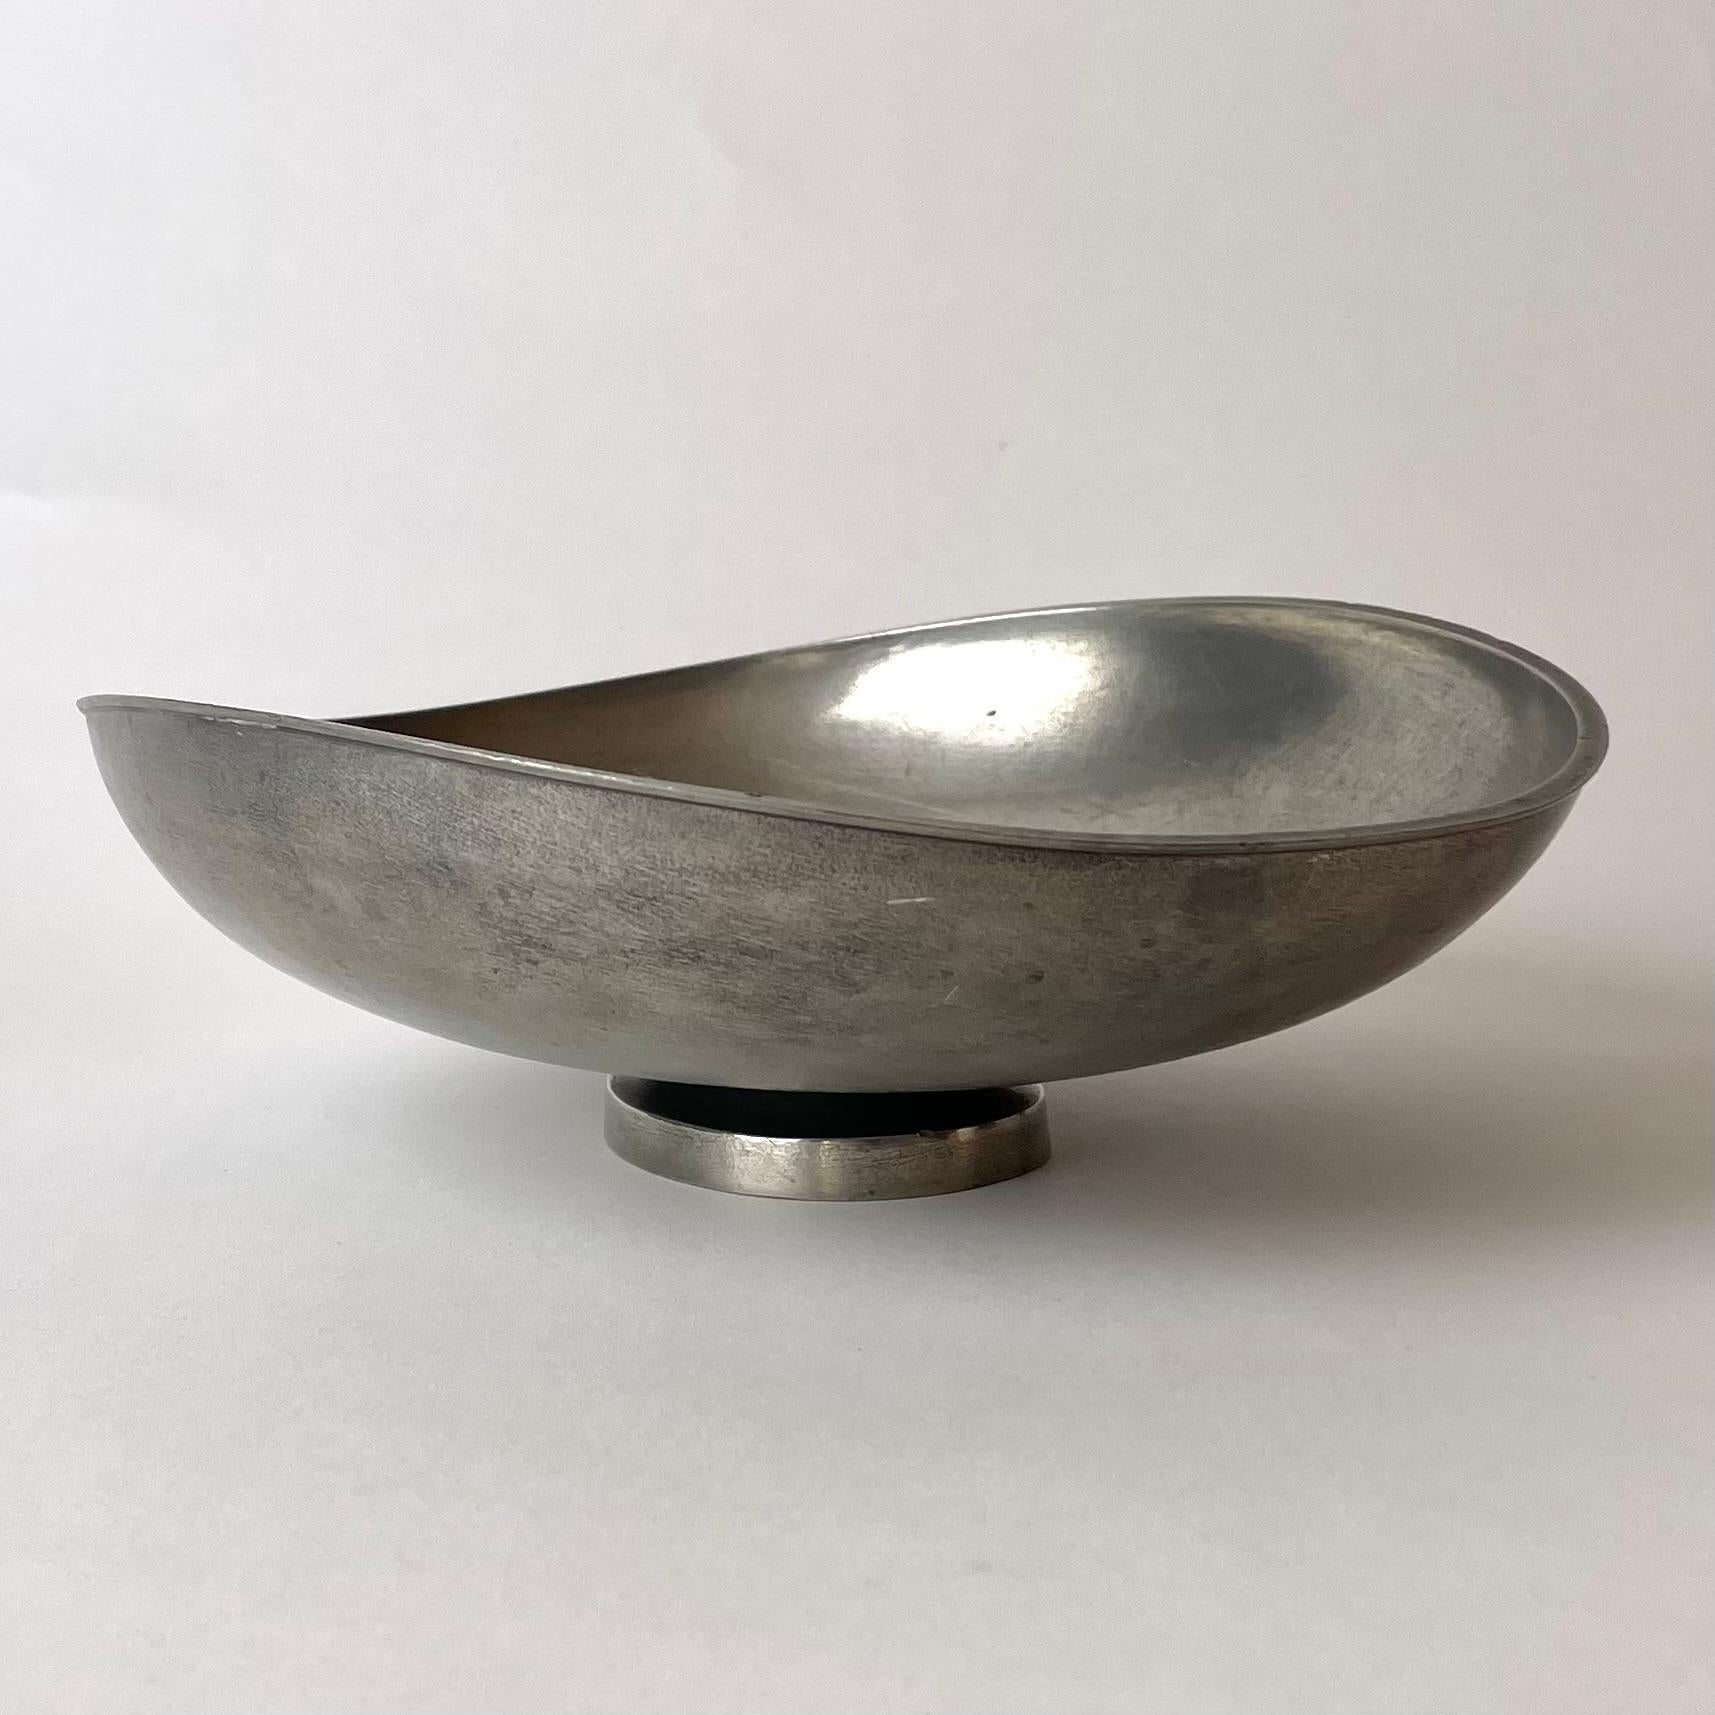 Sophisticated pewter fruit bowl designed by Edvin Ollers (1888-1959) for Schreuder & Olsson, Sweden. Designed during the 1930s-40s. This fruit bowl is made in 1966=Q9

Wear consistent with age and use
